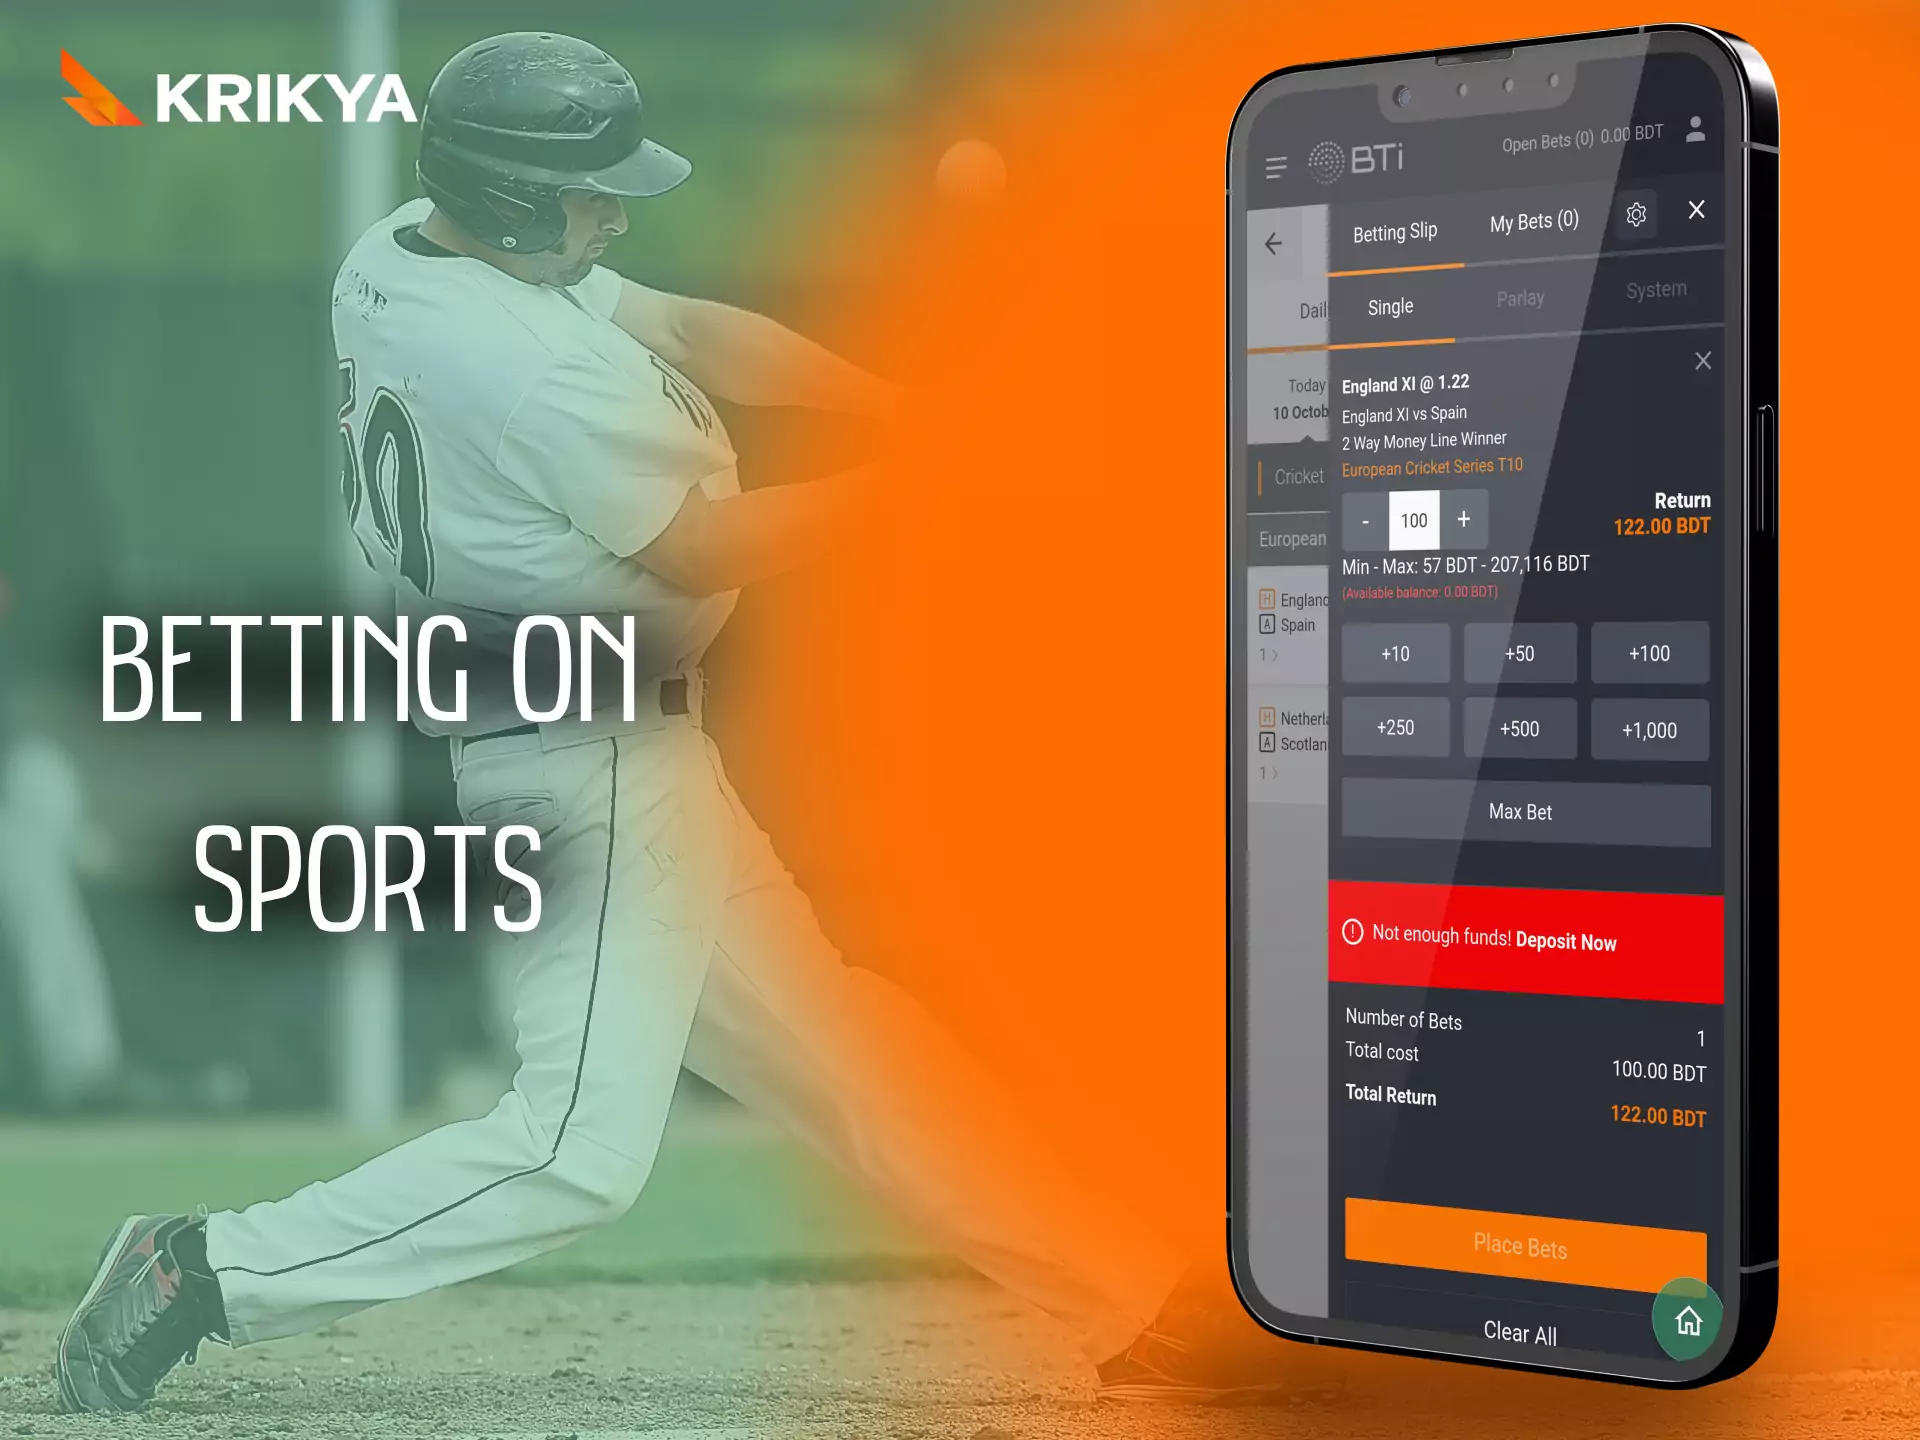 In the Krikya app, place bets on a variety of sports events.